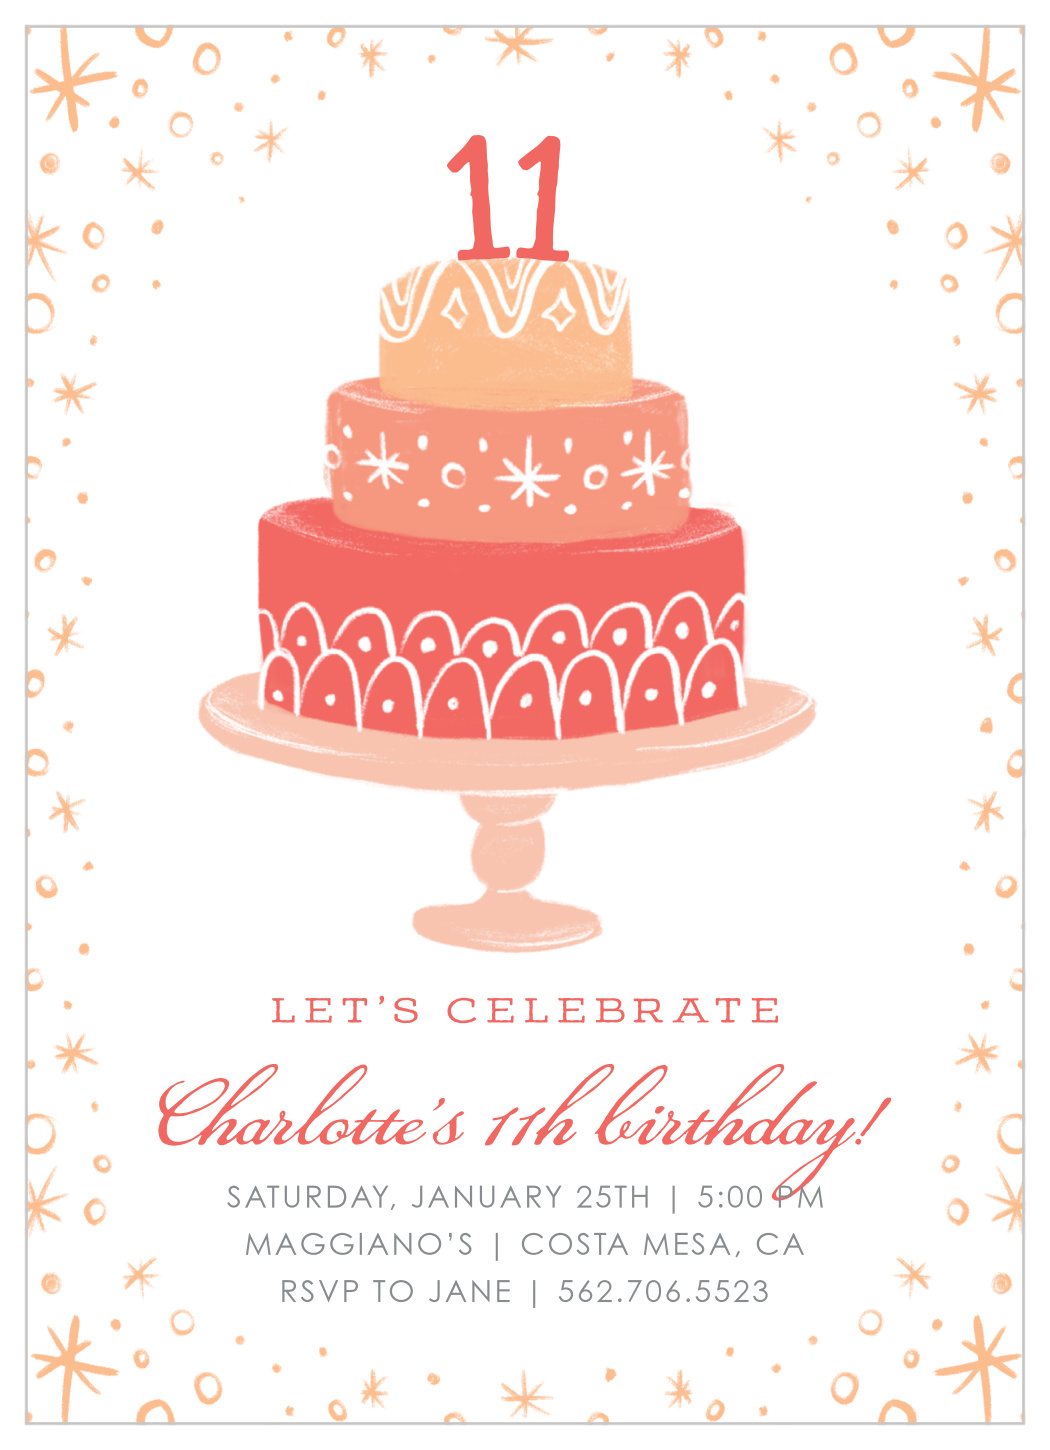 Birthday invitation card with cake Royalty Free Vector Image